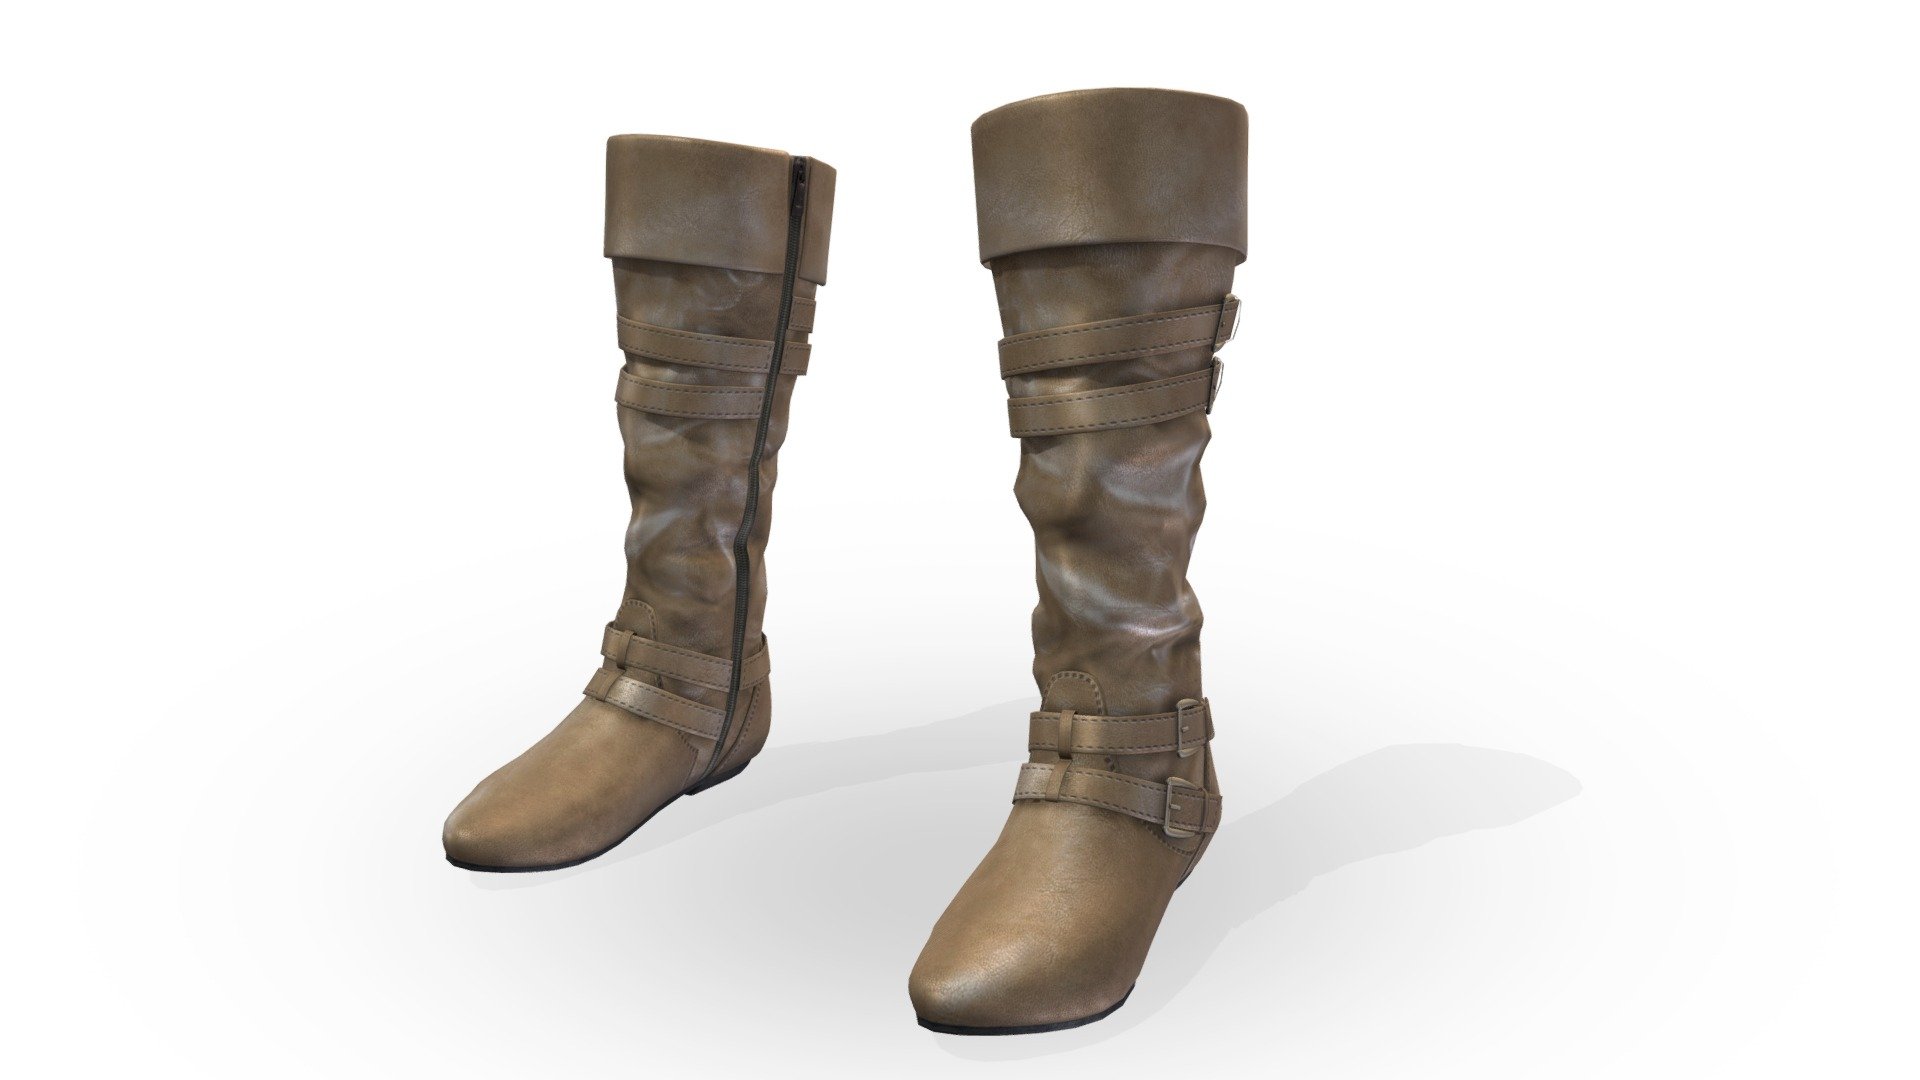 Fashion Beige Leather Thigh High Heels Pirate Boots

Quads Clean Topology

No Overlapping Unwrapped UVs : Left and Right share the same UV

High quality textues (2048 px) : baked albedo, specular, normals, ao, rougness

FBX, Obj, gITF, USDZ

PBR or Classic

Please ask for any other questions

Type user:3dia seart term for other models in our store

*ToS (The most flexible terms)



Our models’ derivative versions (changing the texture or the form) can be used and resold on any platform providing it doesn’t resemble the original (Minor tweaks are not accepted).



You can use our items as you wish in any video and published media production



You can use our items “as is” in your games providing source files can’t be downloaded



You can use our items “as is” in your projects commercially and non commercially providing our item is not the main item you are selling



The rest of the usage is subject to Standard Licensing*


 - Brown Leather Female Flat Knee Boots - Buy Royalty Free 3D model by 3dia 3d model